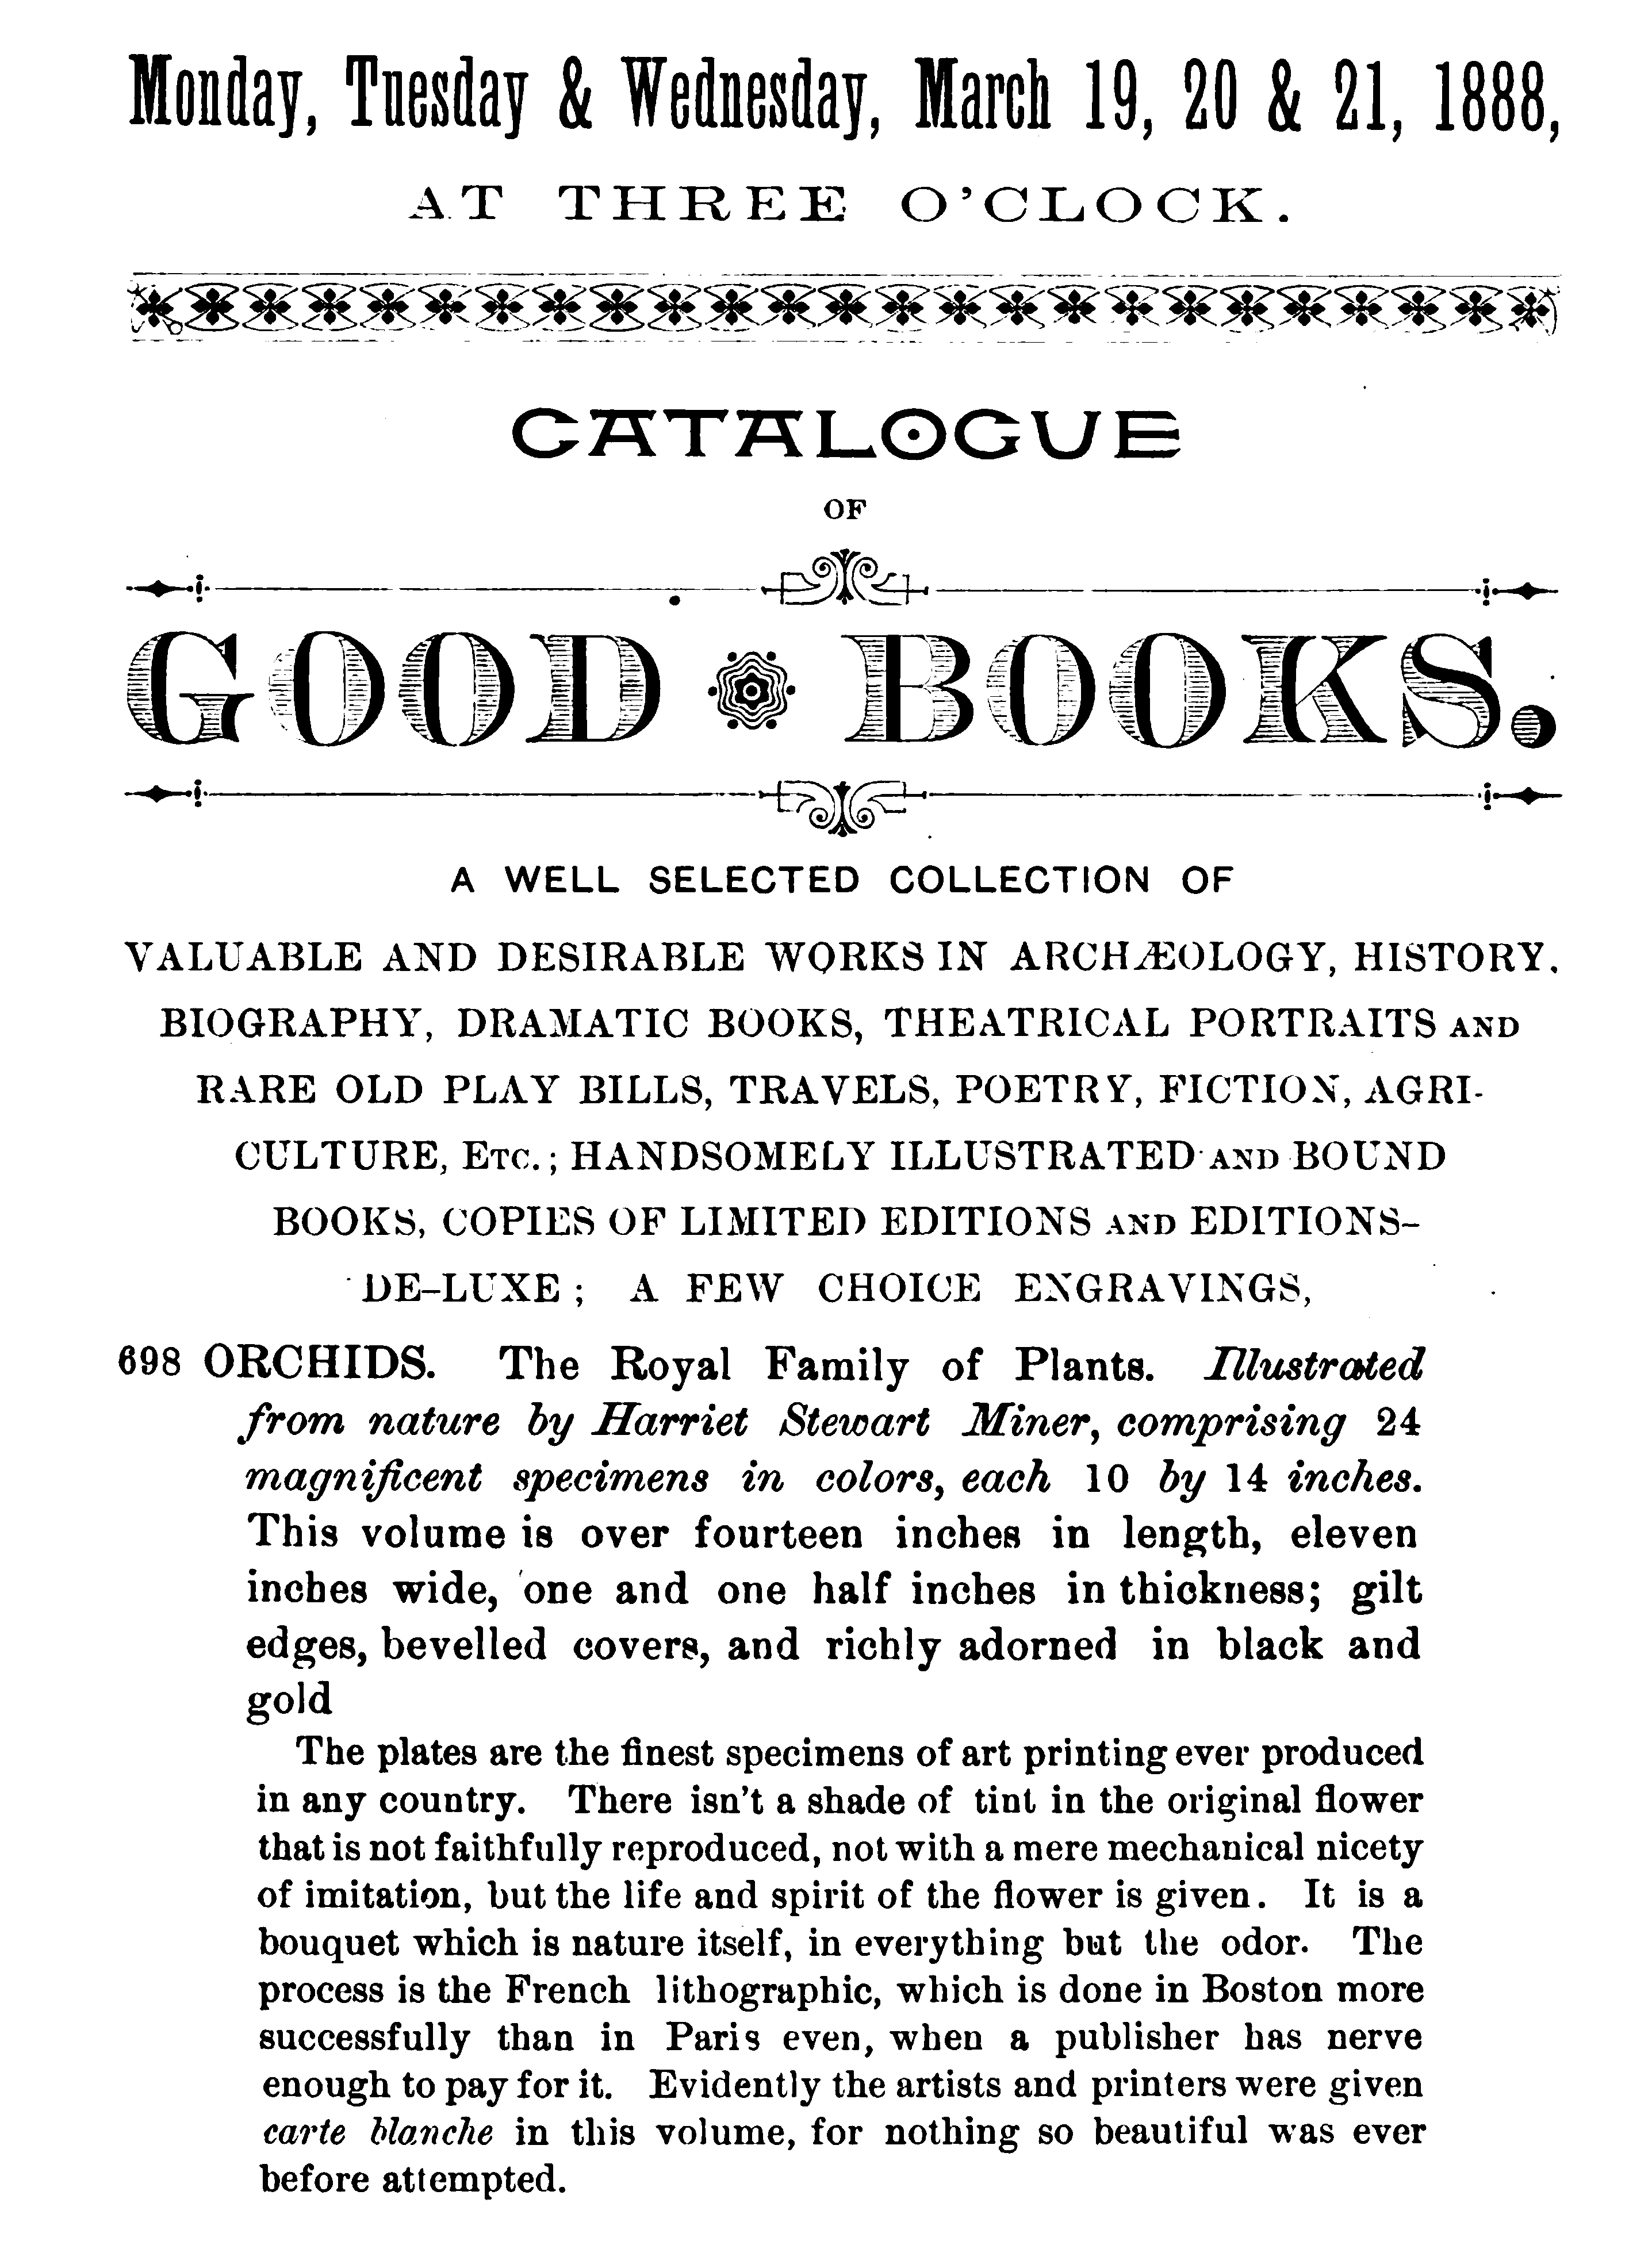 Catalogue_of_Good_Books-harriet-stewart-miner-orchids-the_royal_family_of_plants